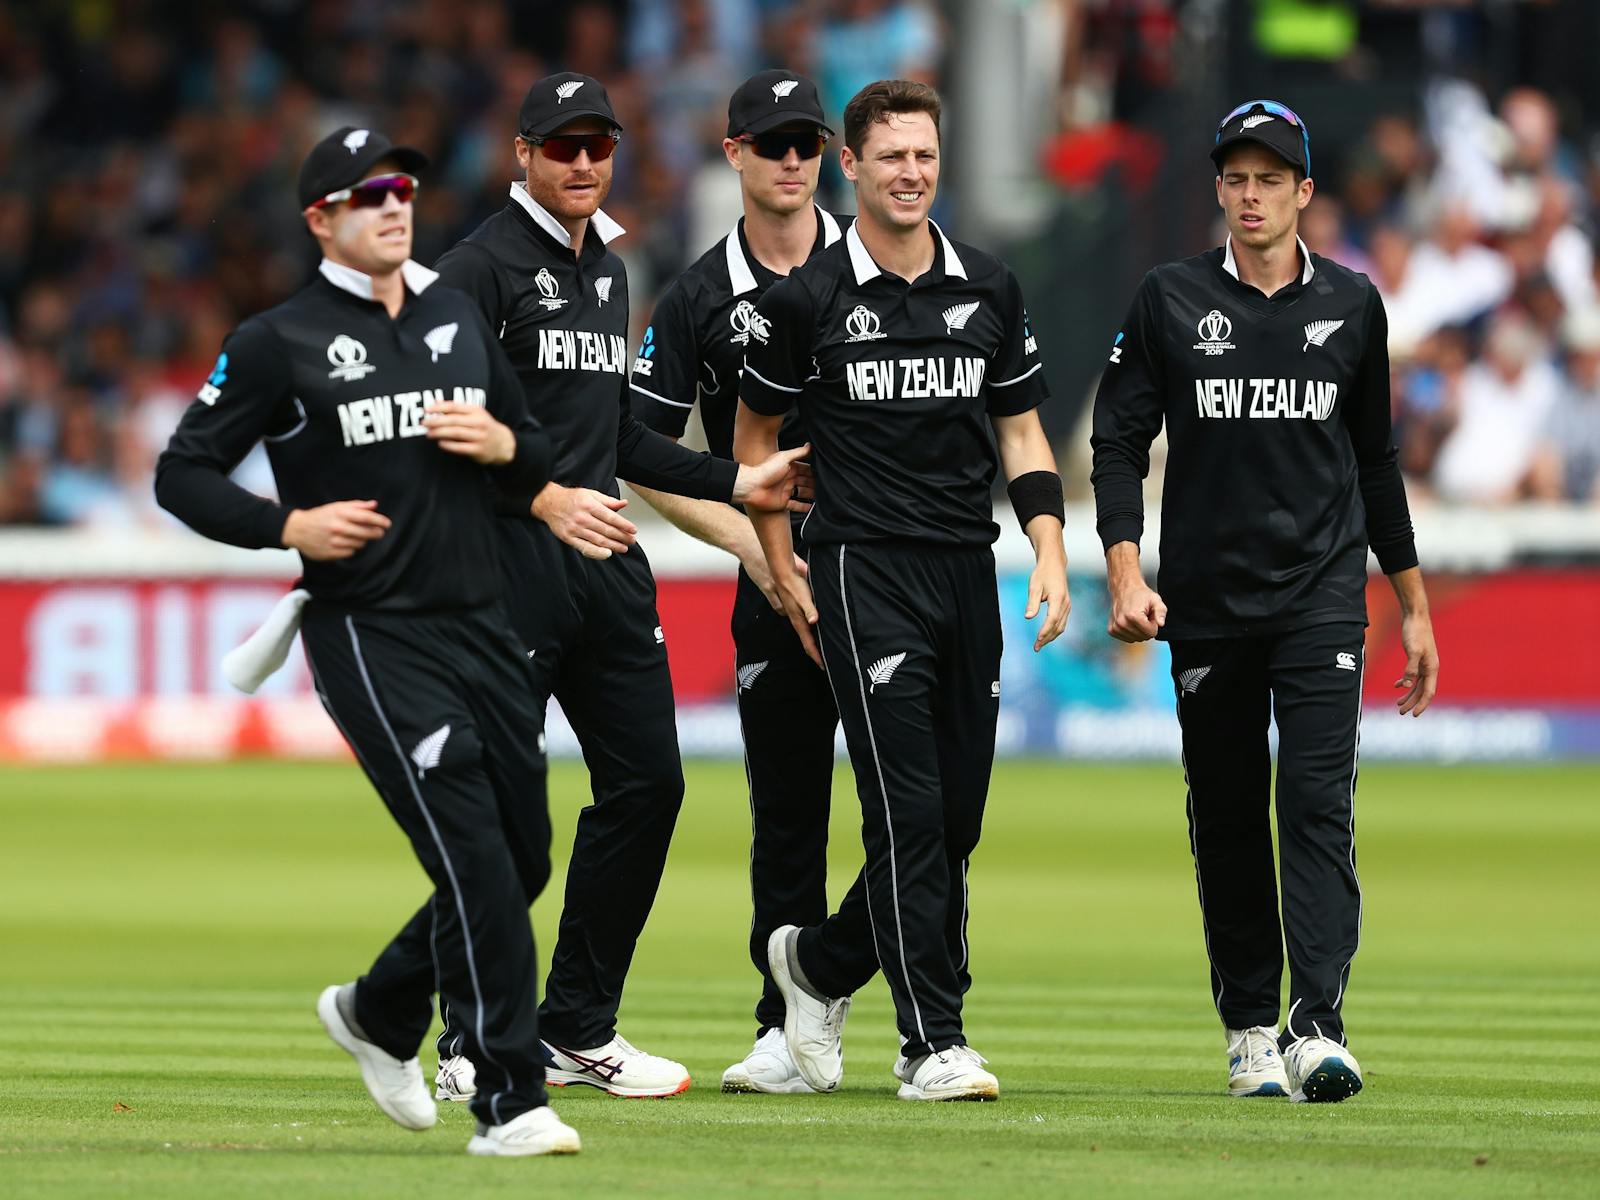 Image for Postponed - T20 World Cup Men's New Zealand vs A1